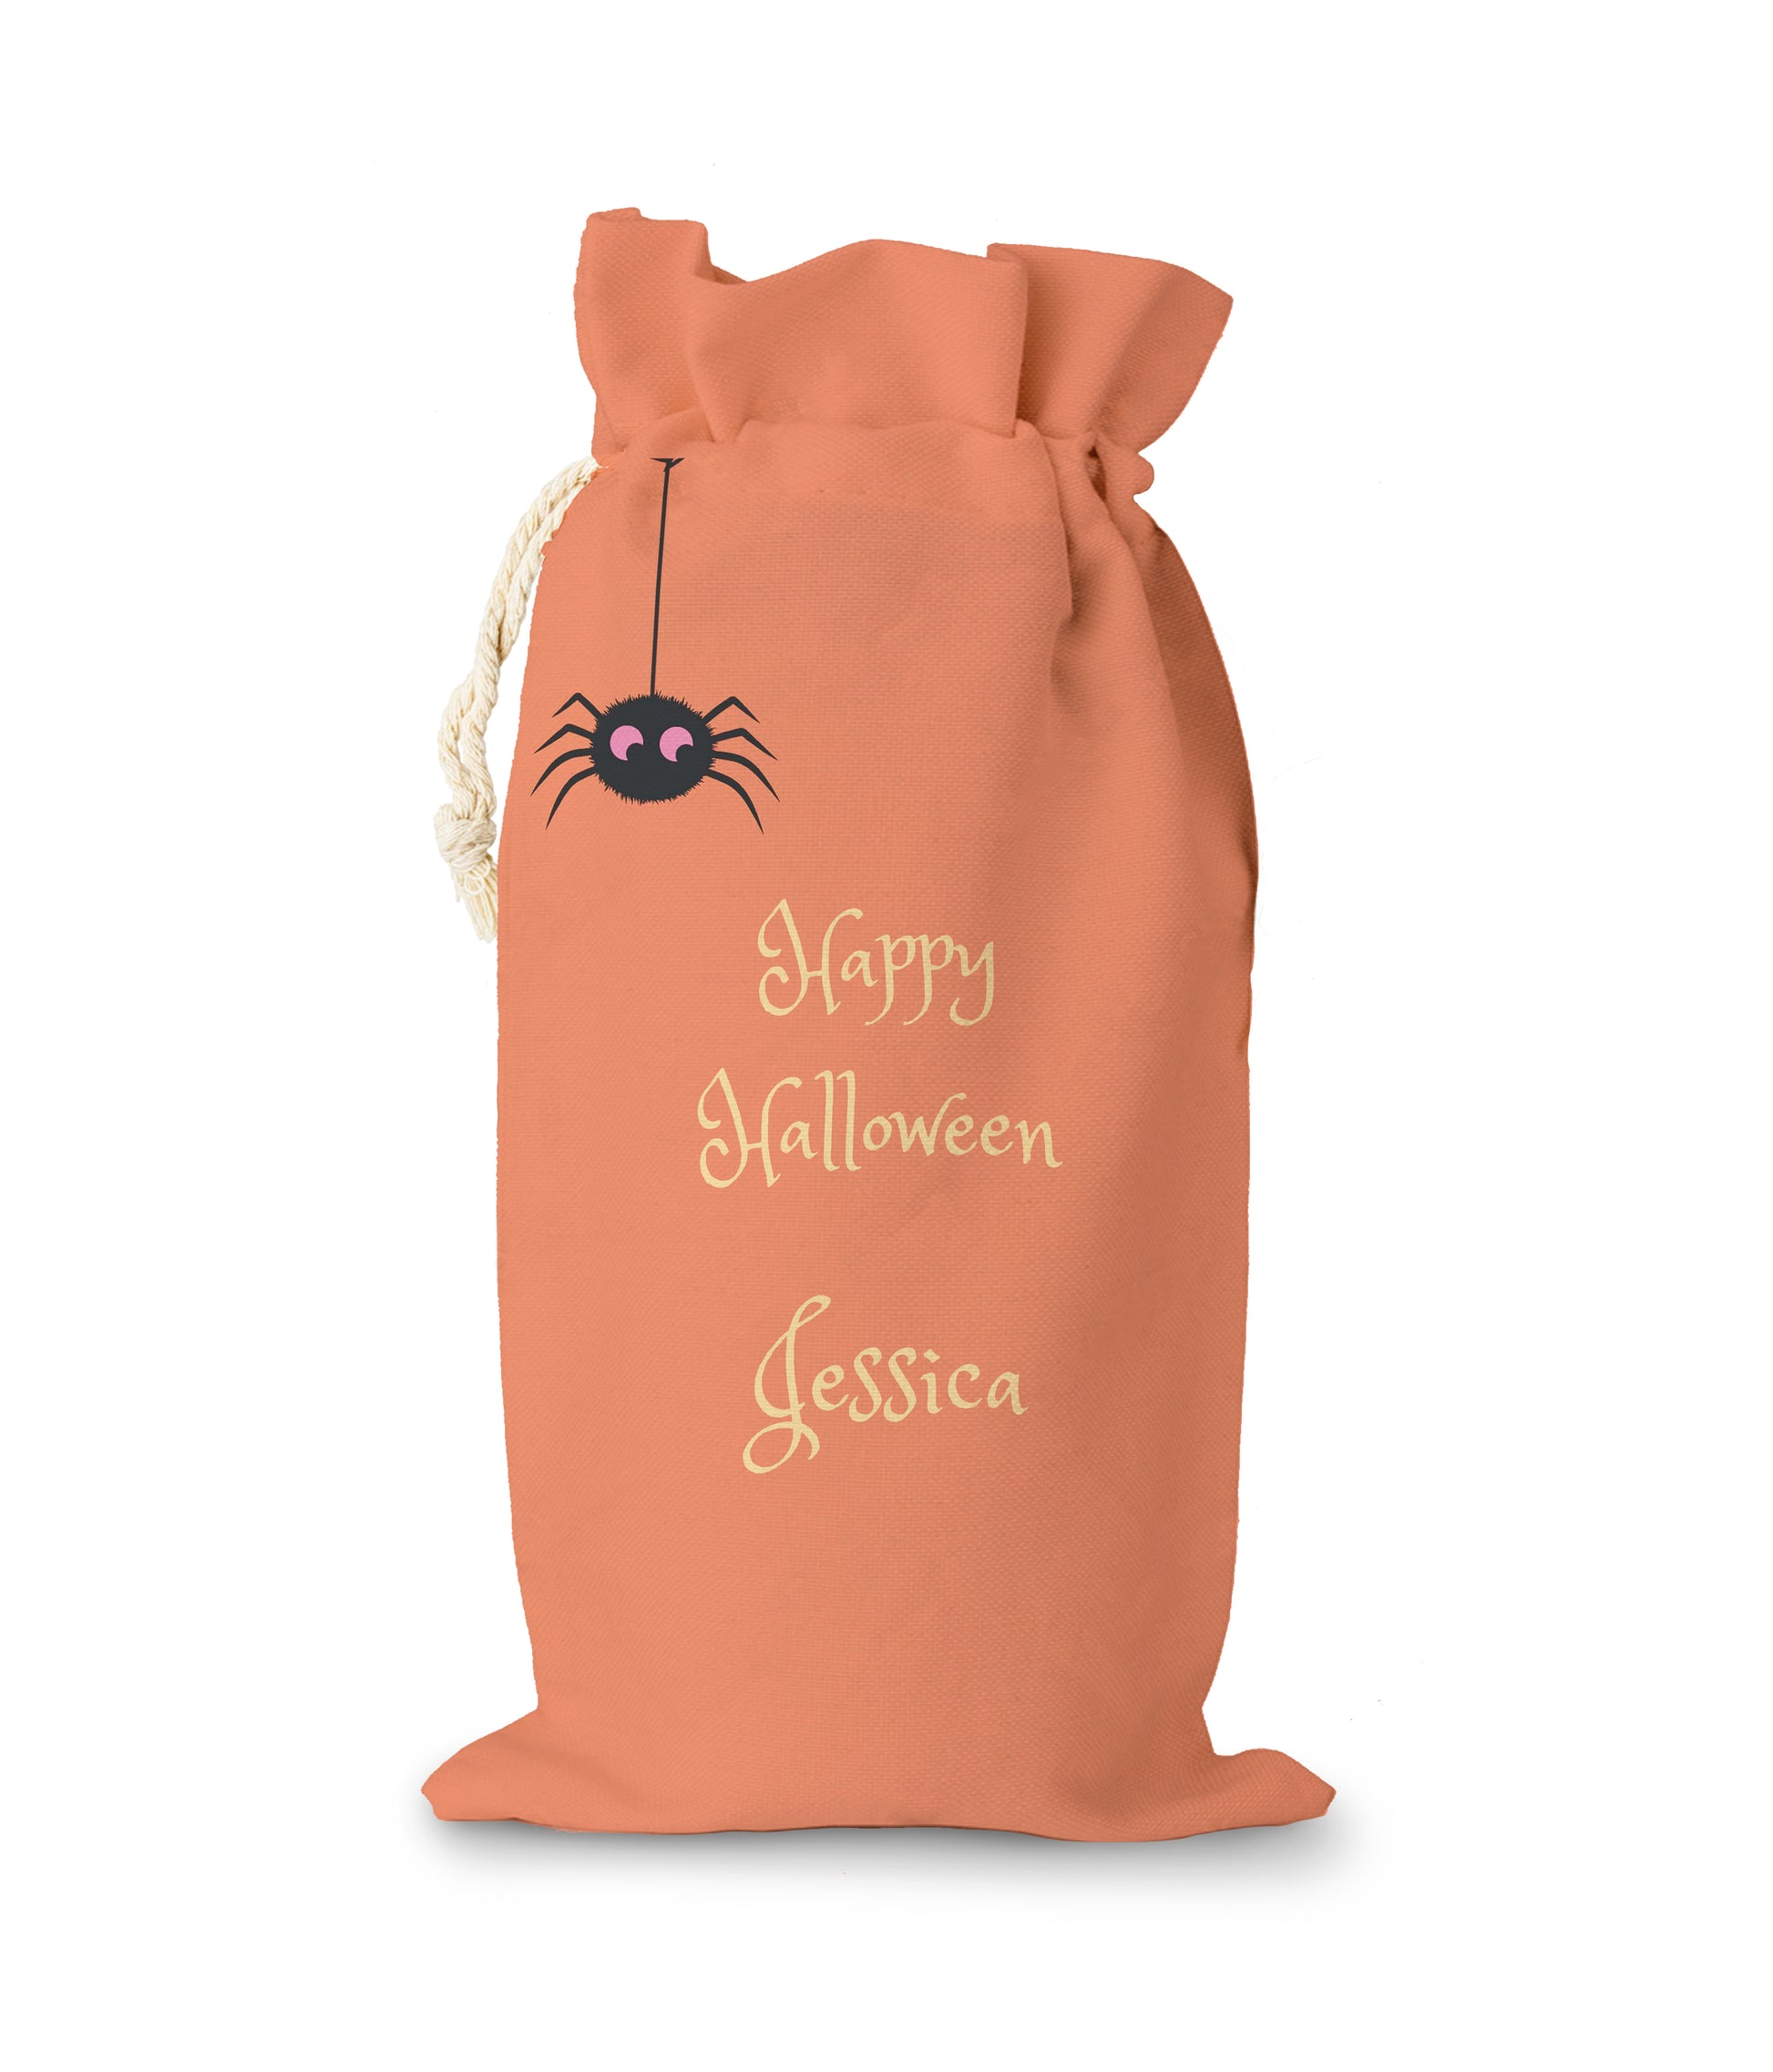 Compactable Spider And Cat Halloween Sack with Text "Happy Halloween Jessica"